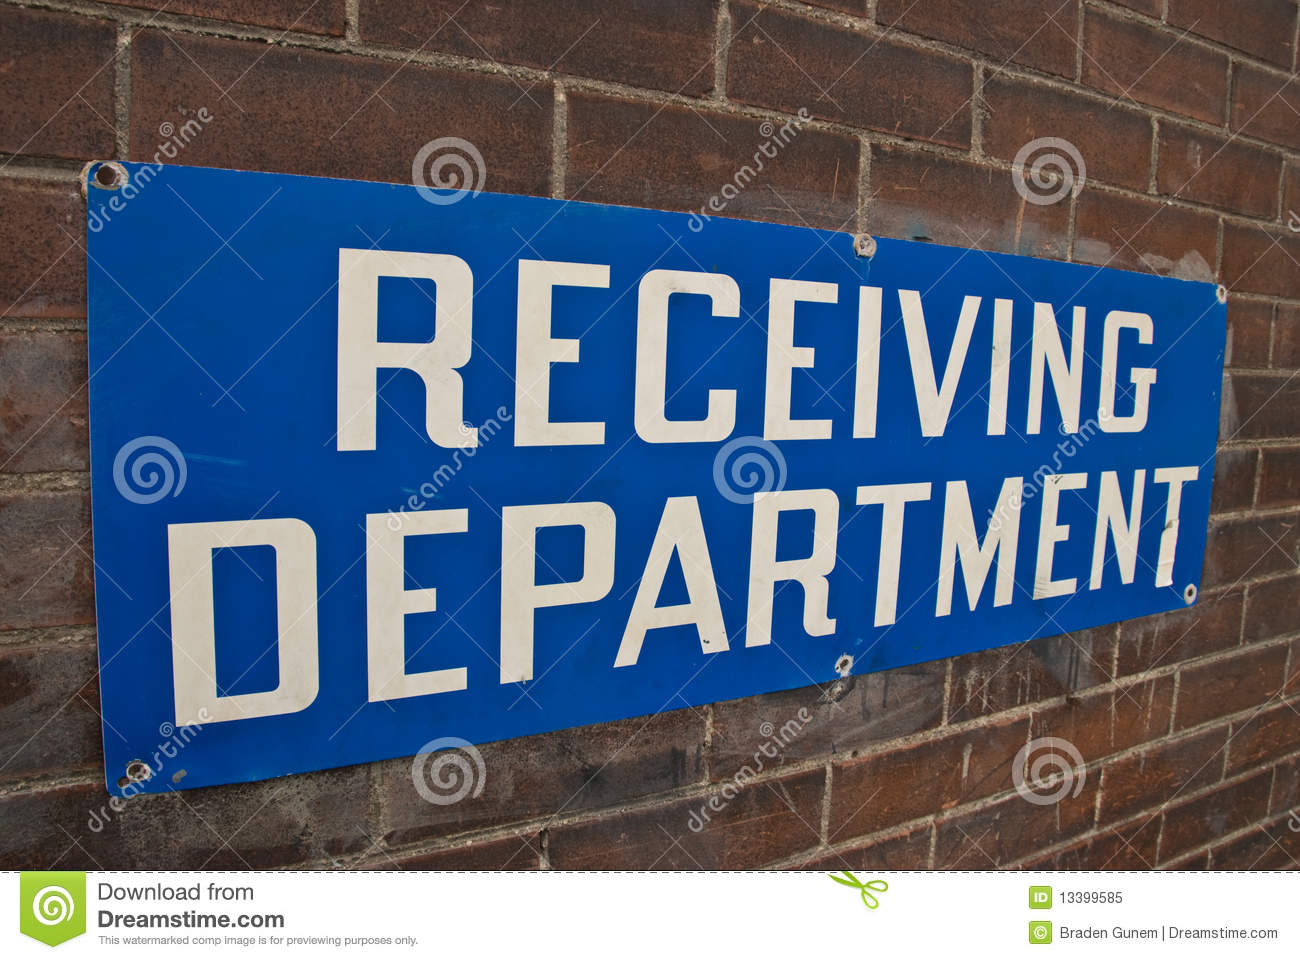 Receiving Department Royalty Free Stock Photo   Image  13399585